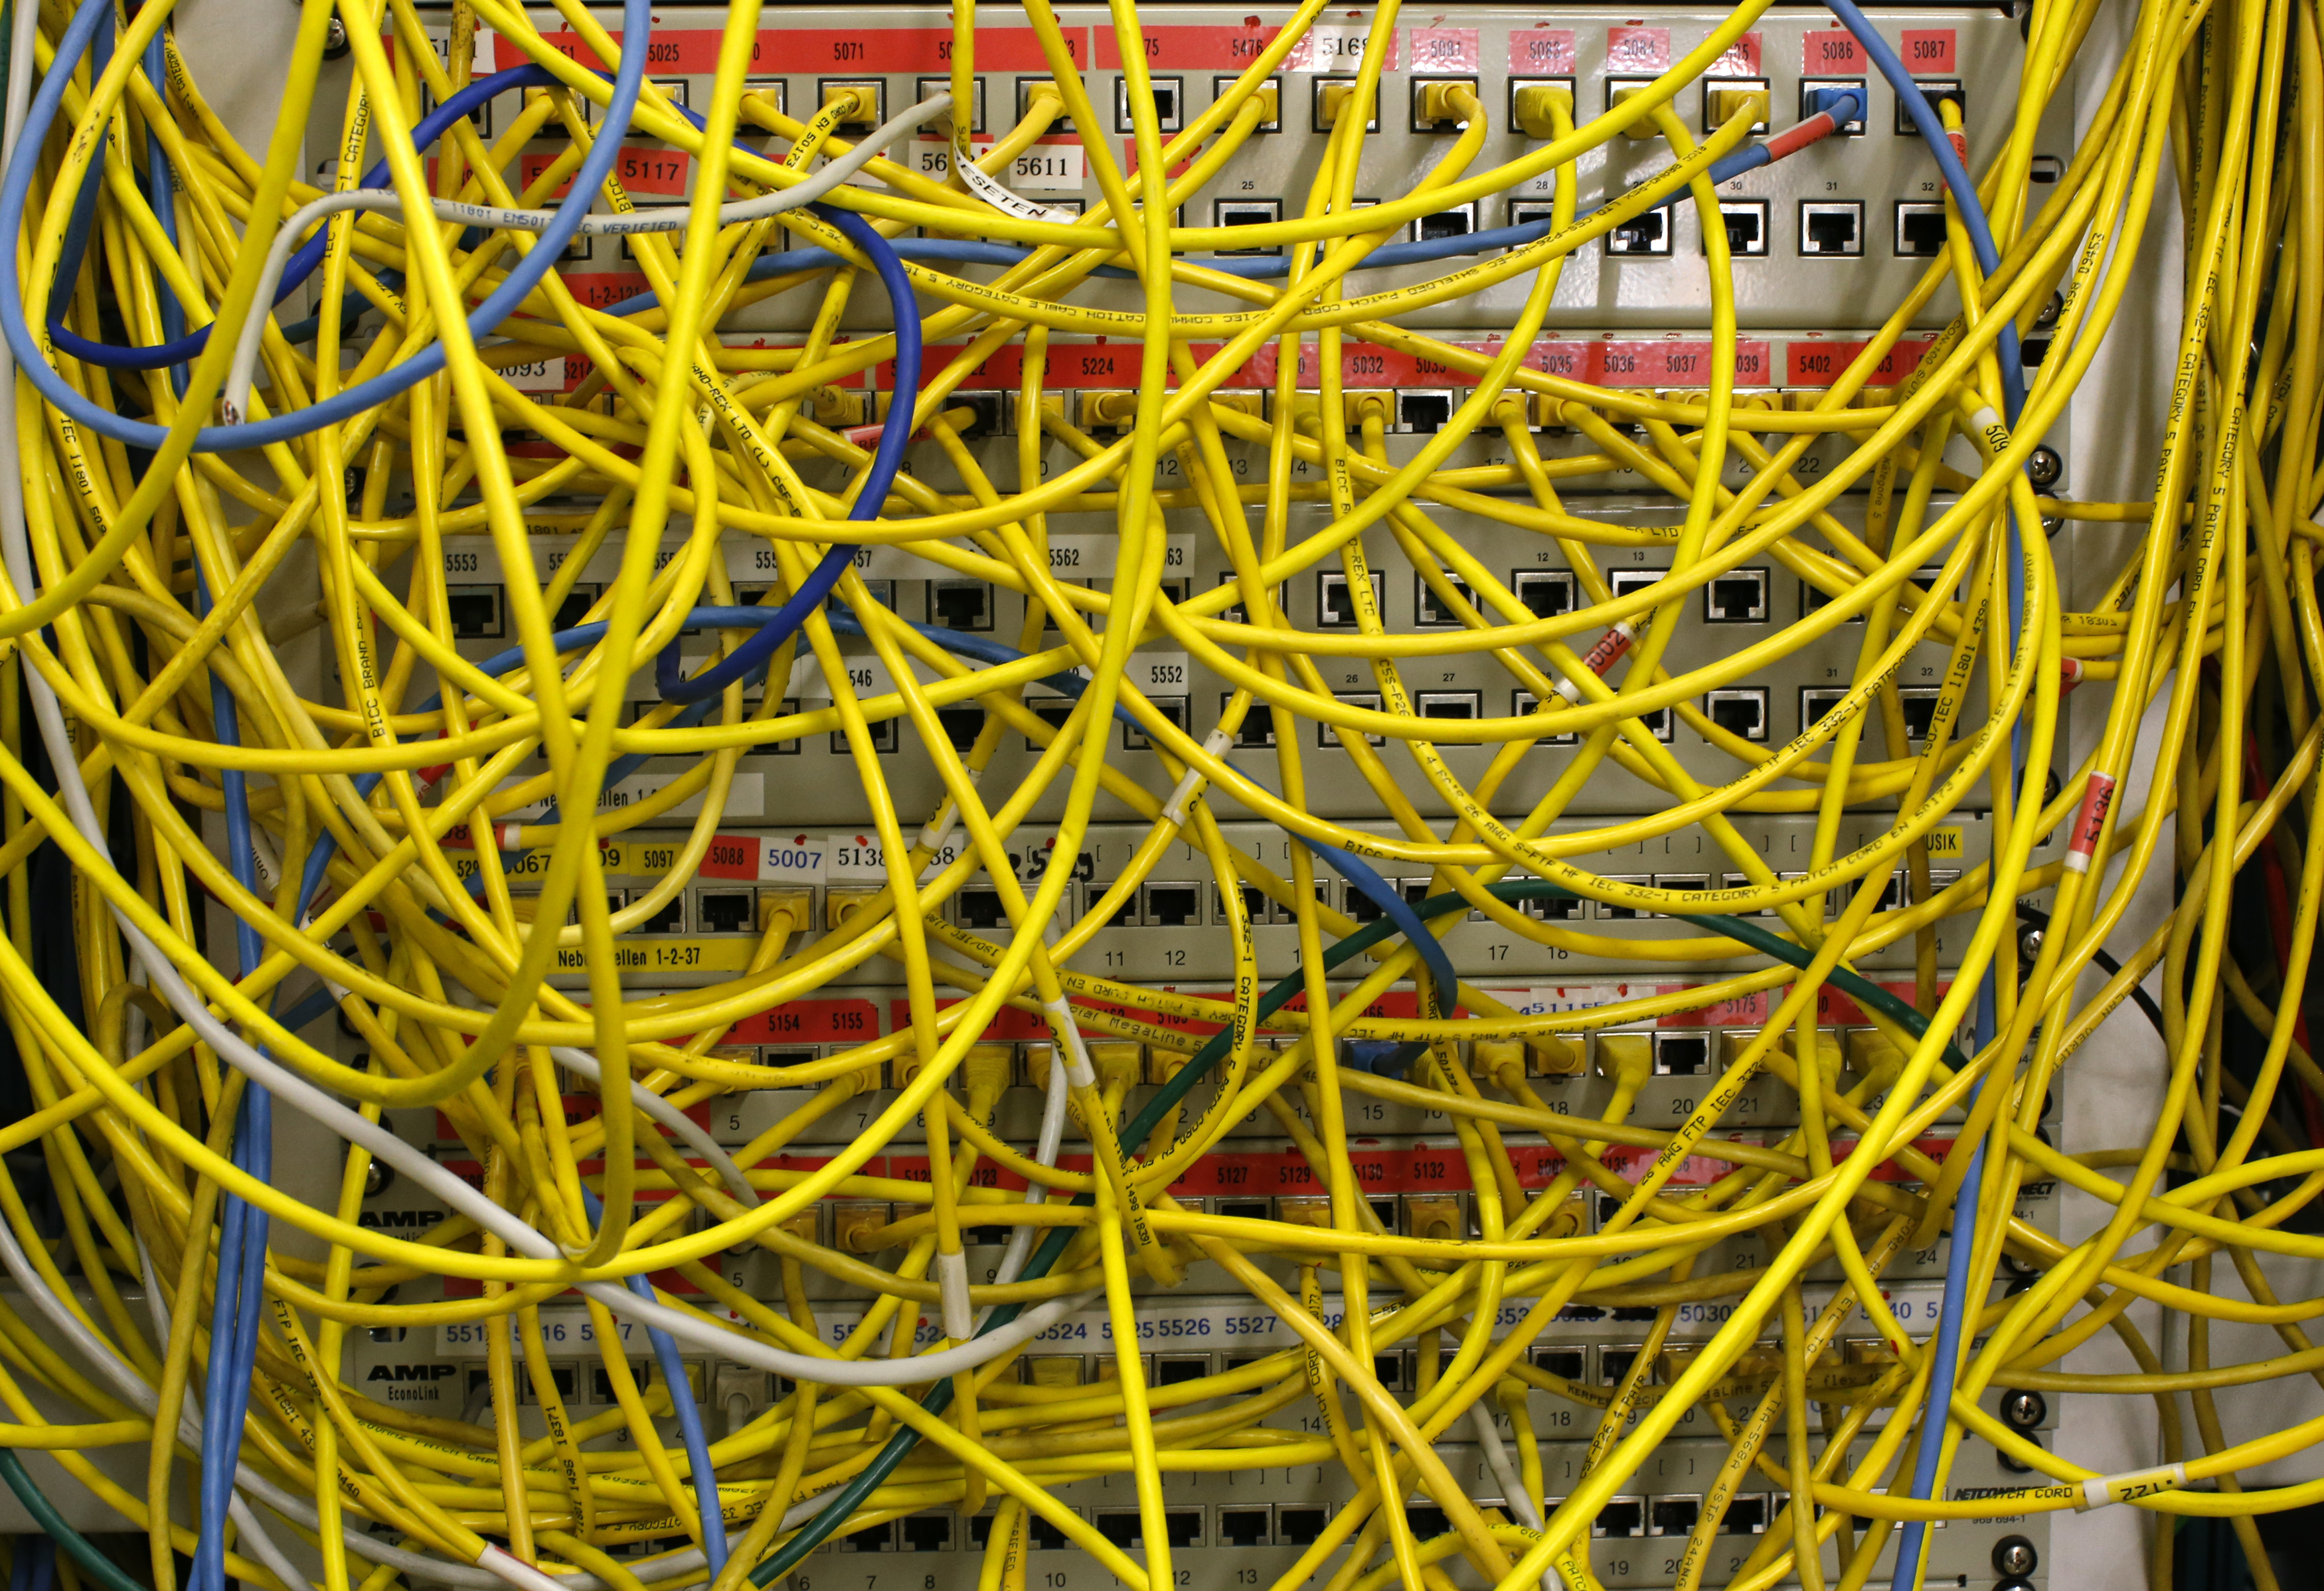 Ethernet cables used for internet connections are pictured in a Berlin office